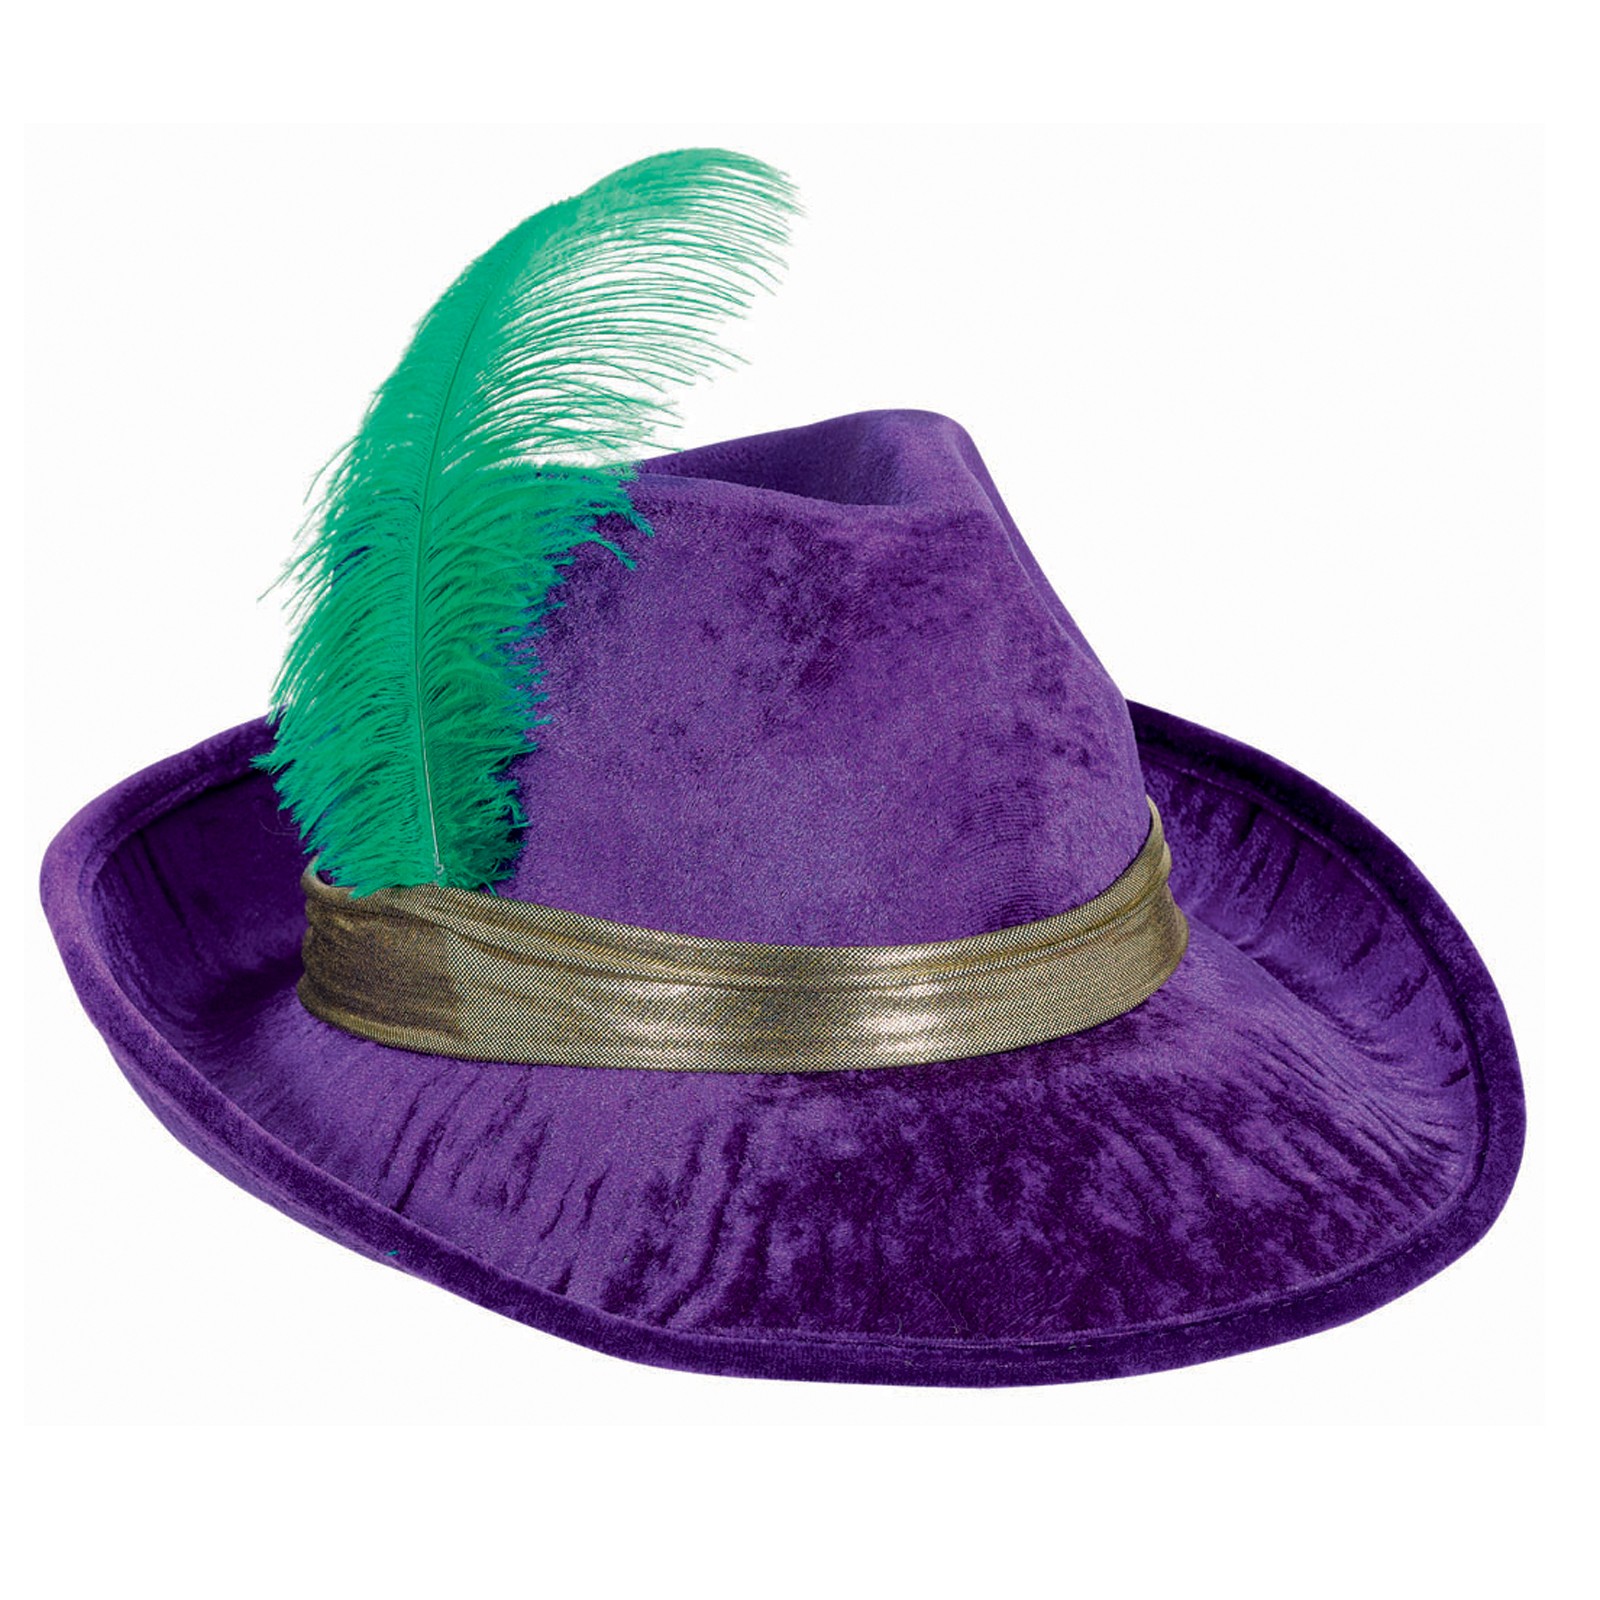 Pimp-Hat-with-Feather.jpg